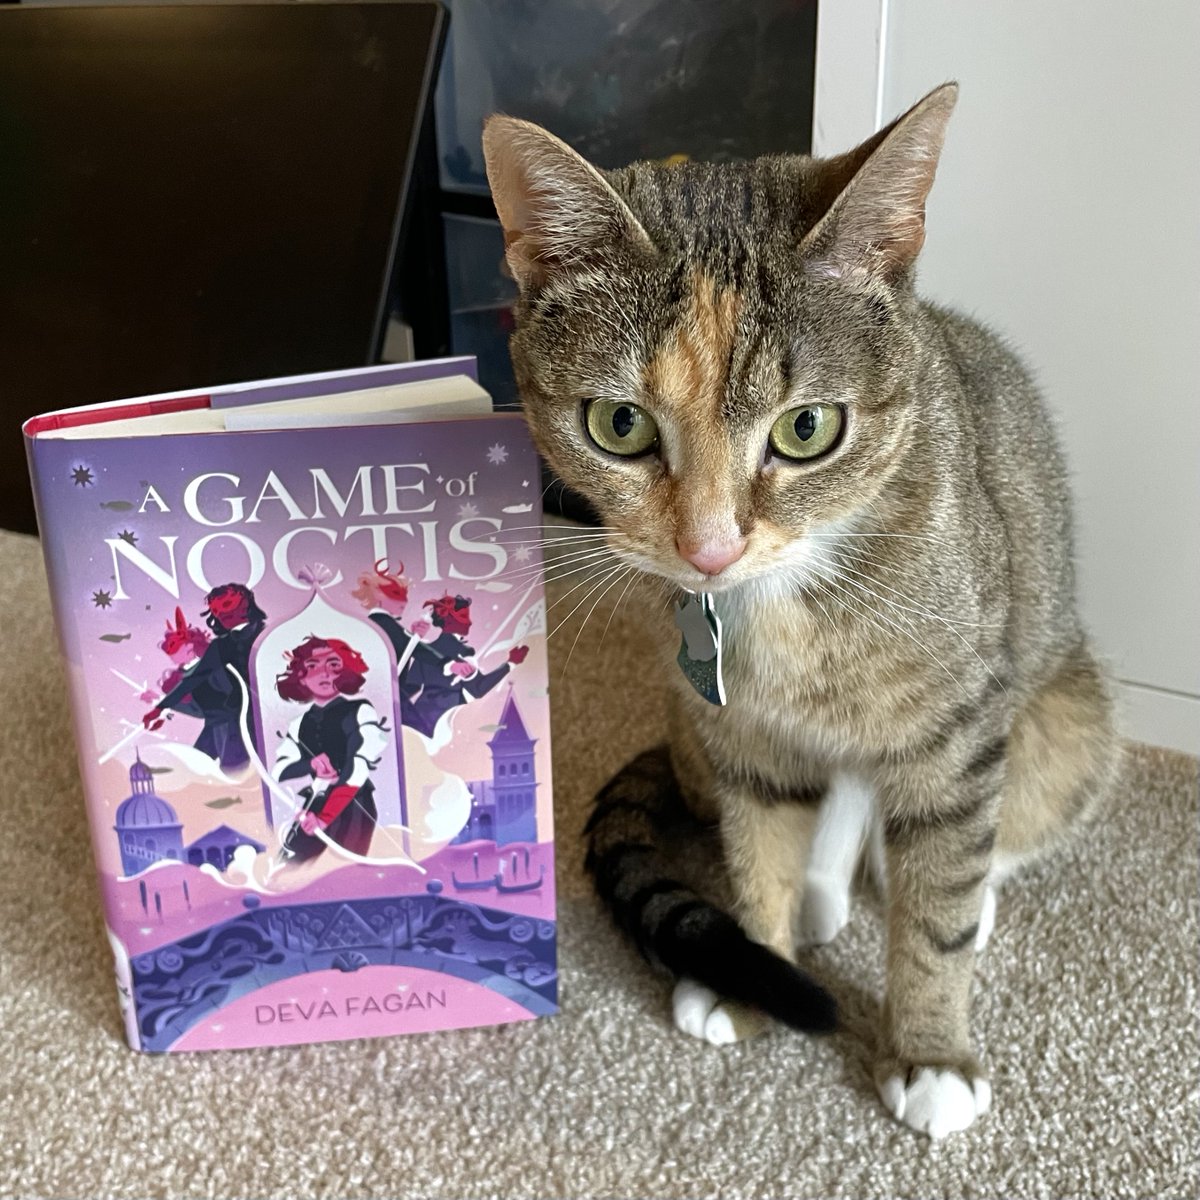 “A Game of Noctis is an adventure-filled story with high stakes & spunky characters, bringing a conversation about inequality to the forefront. I loved this book!” -Mallory A GAME OF NOCTIS releases April 9th, and we have signed bookplates! Pre-order now or snag one on pub date